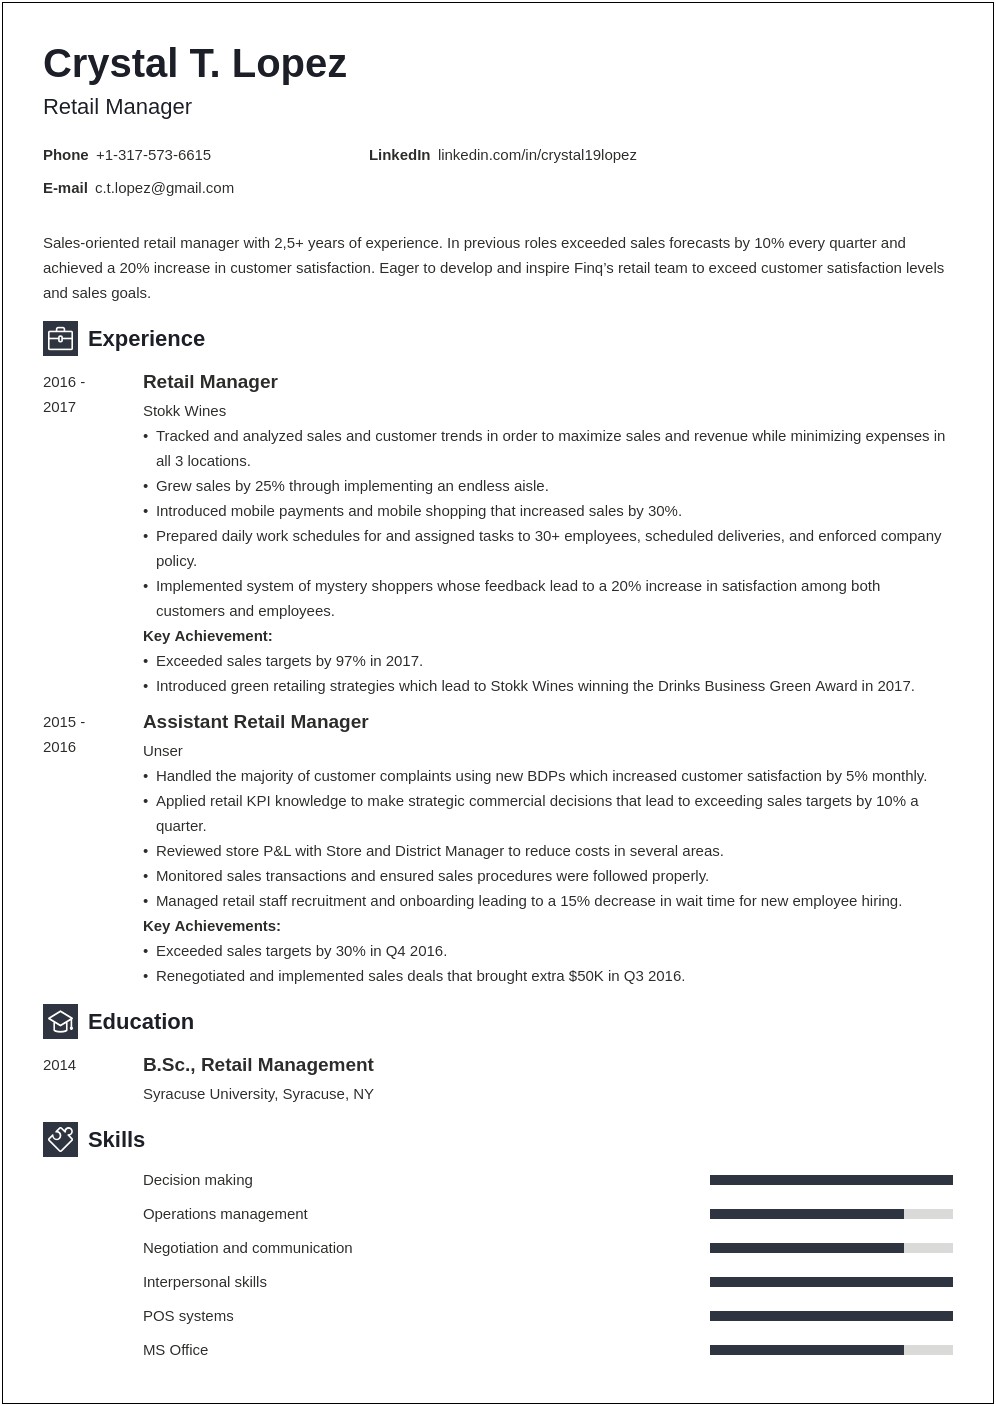 Resume For Store Manager Post